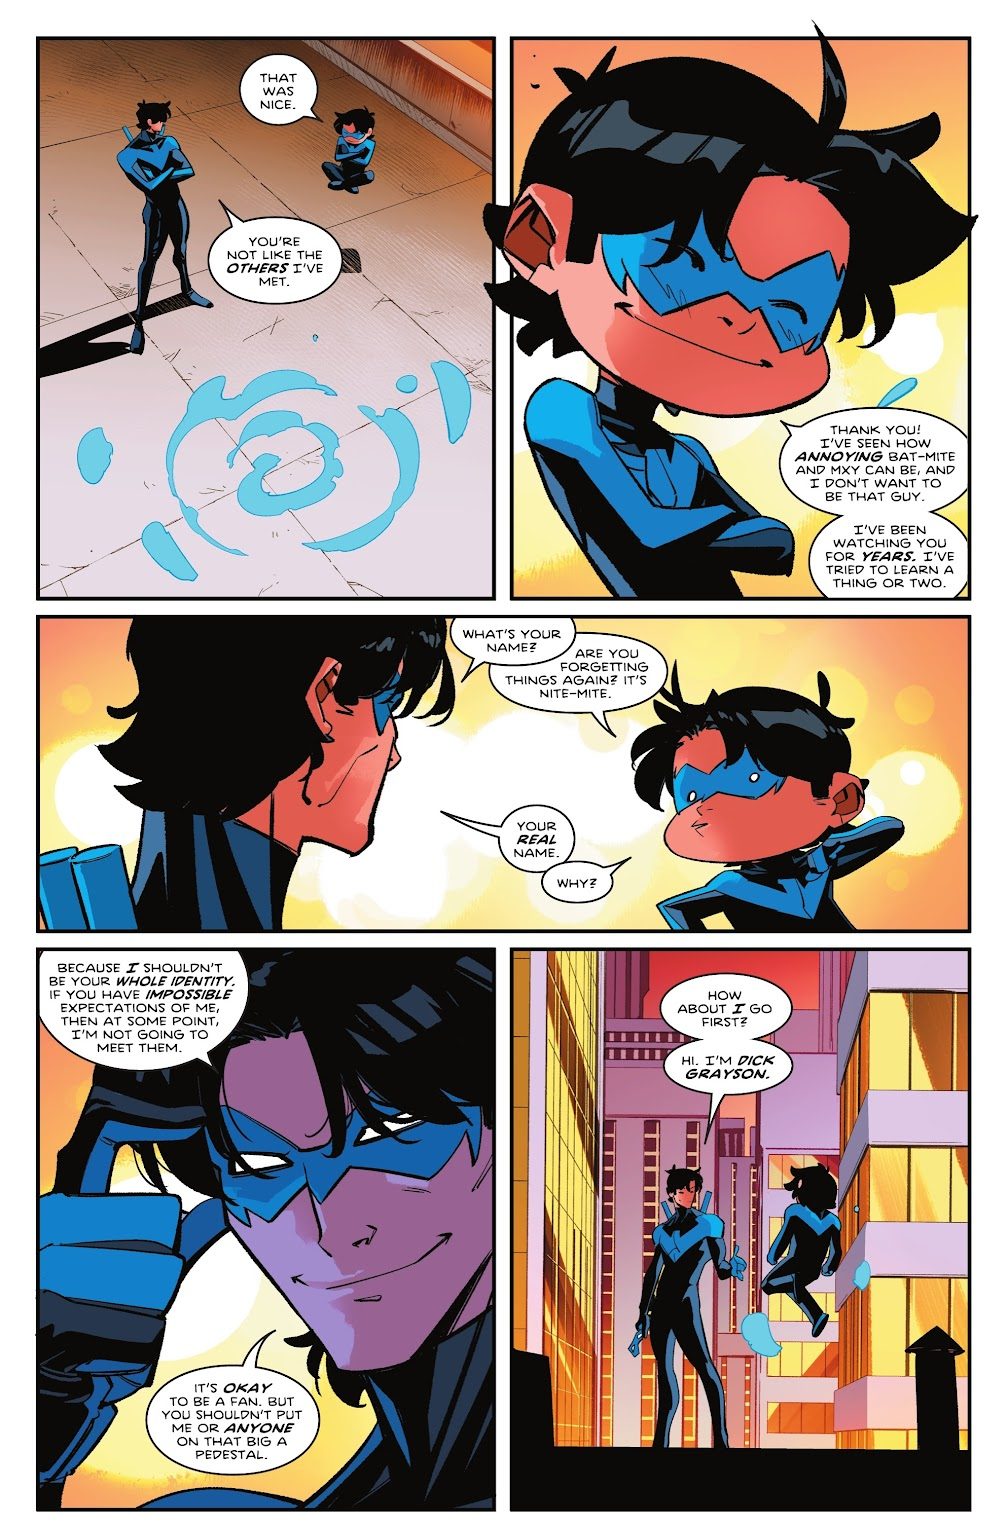 Nightwing's First Meeting With Nite-Mite 